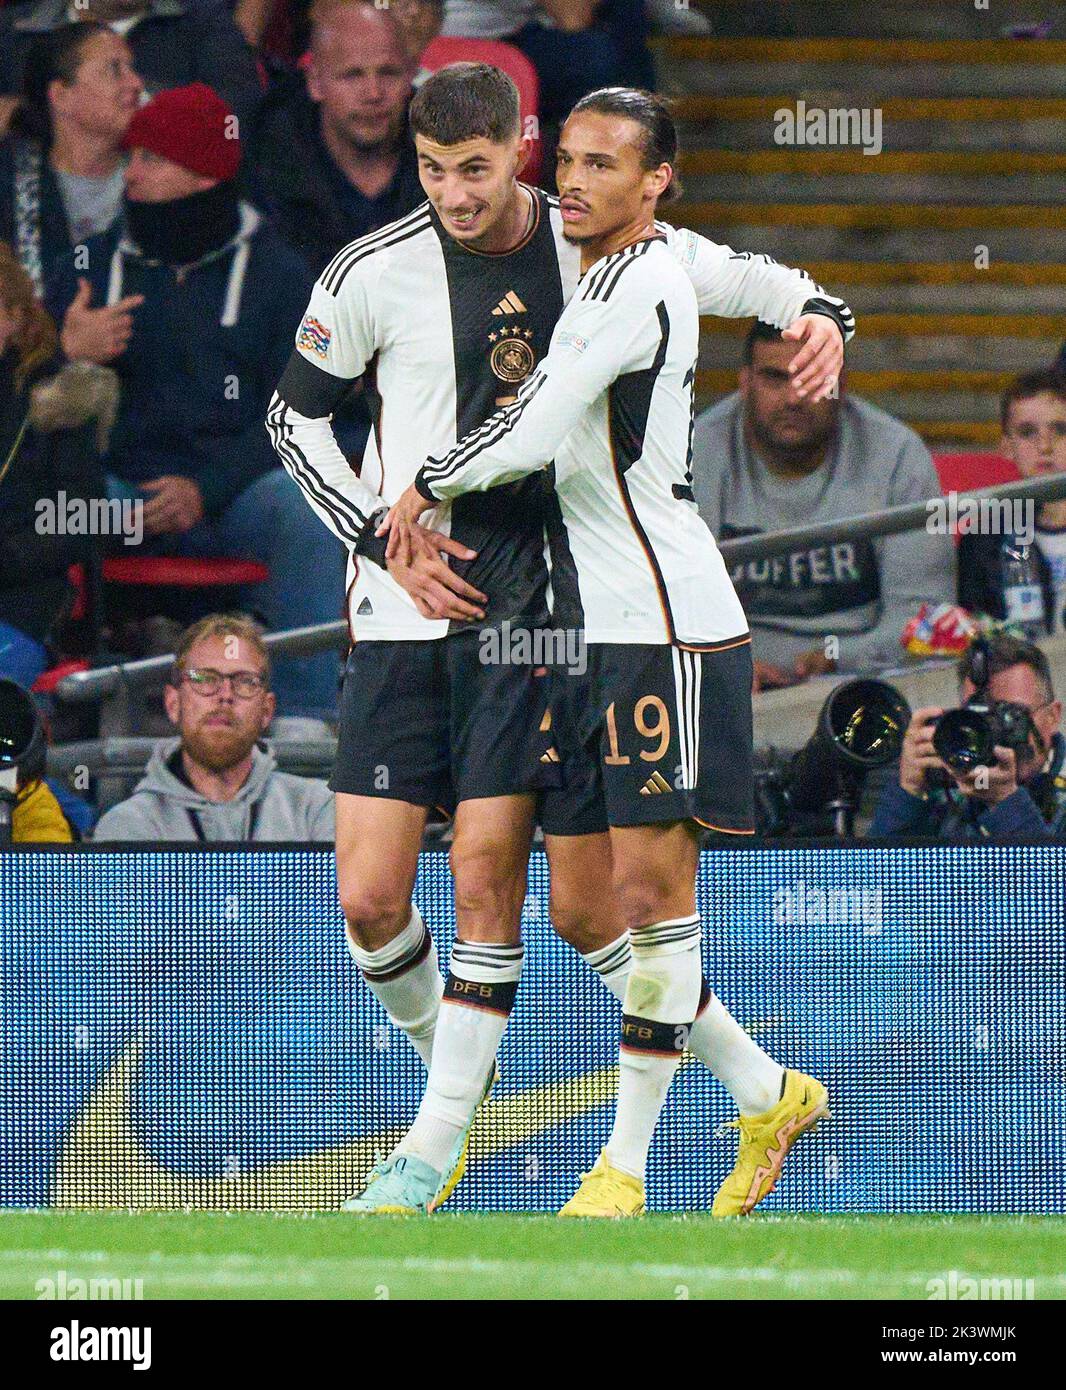 Kai Havertz, DFB 7 celebrates his goal, happy, laugh, celebration, 0-2 in the UEFA Nations League 2022 match  ENGLAND - GERMANY   in Season 2022/2023 on Sept 26, 2022  in London, Great Britain.  © Peter Schatz / Alamy Live News Stock Photo